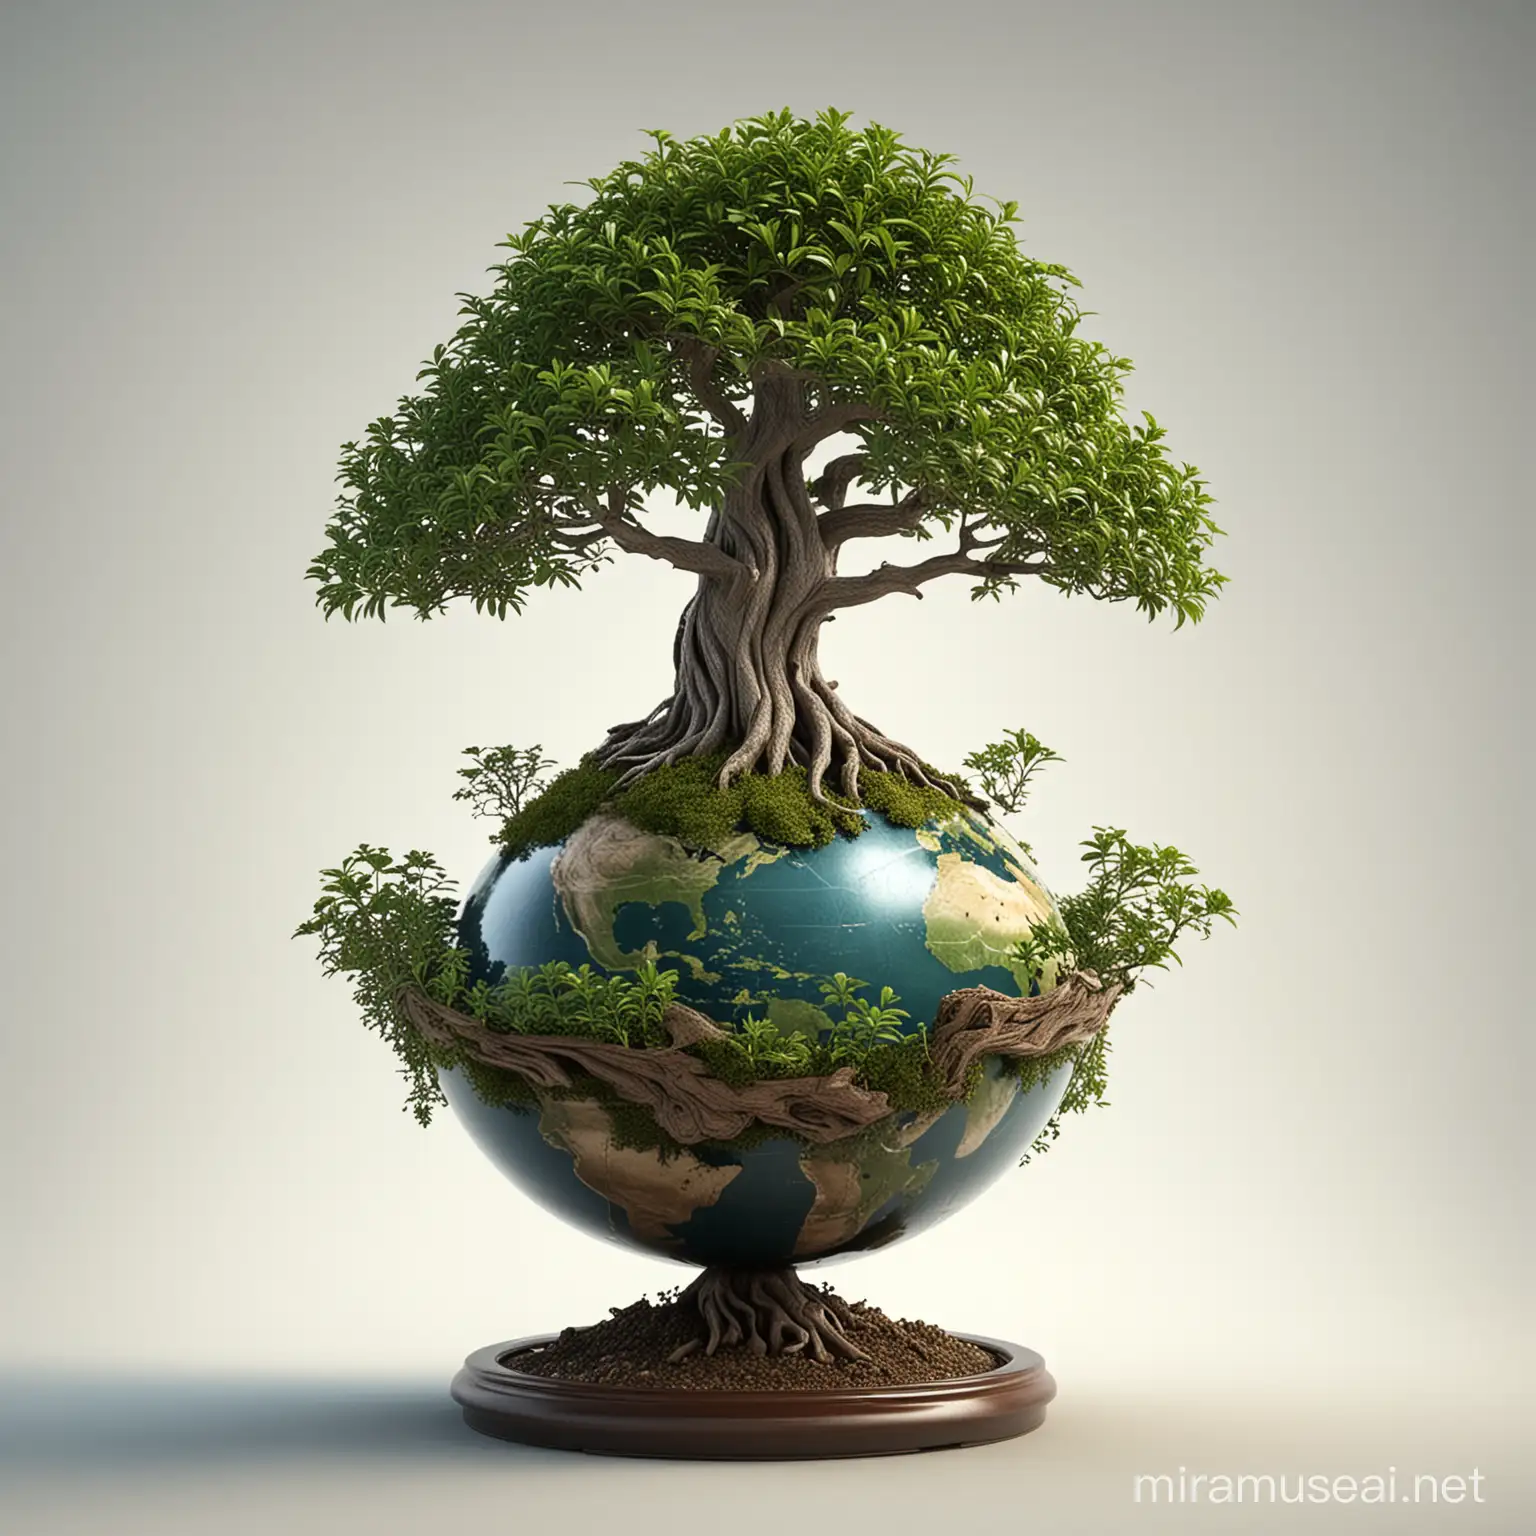 Earth Bonsai Tree Held by Human Hands Environmental Care and Nature Nurturing